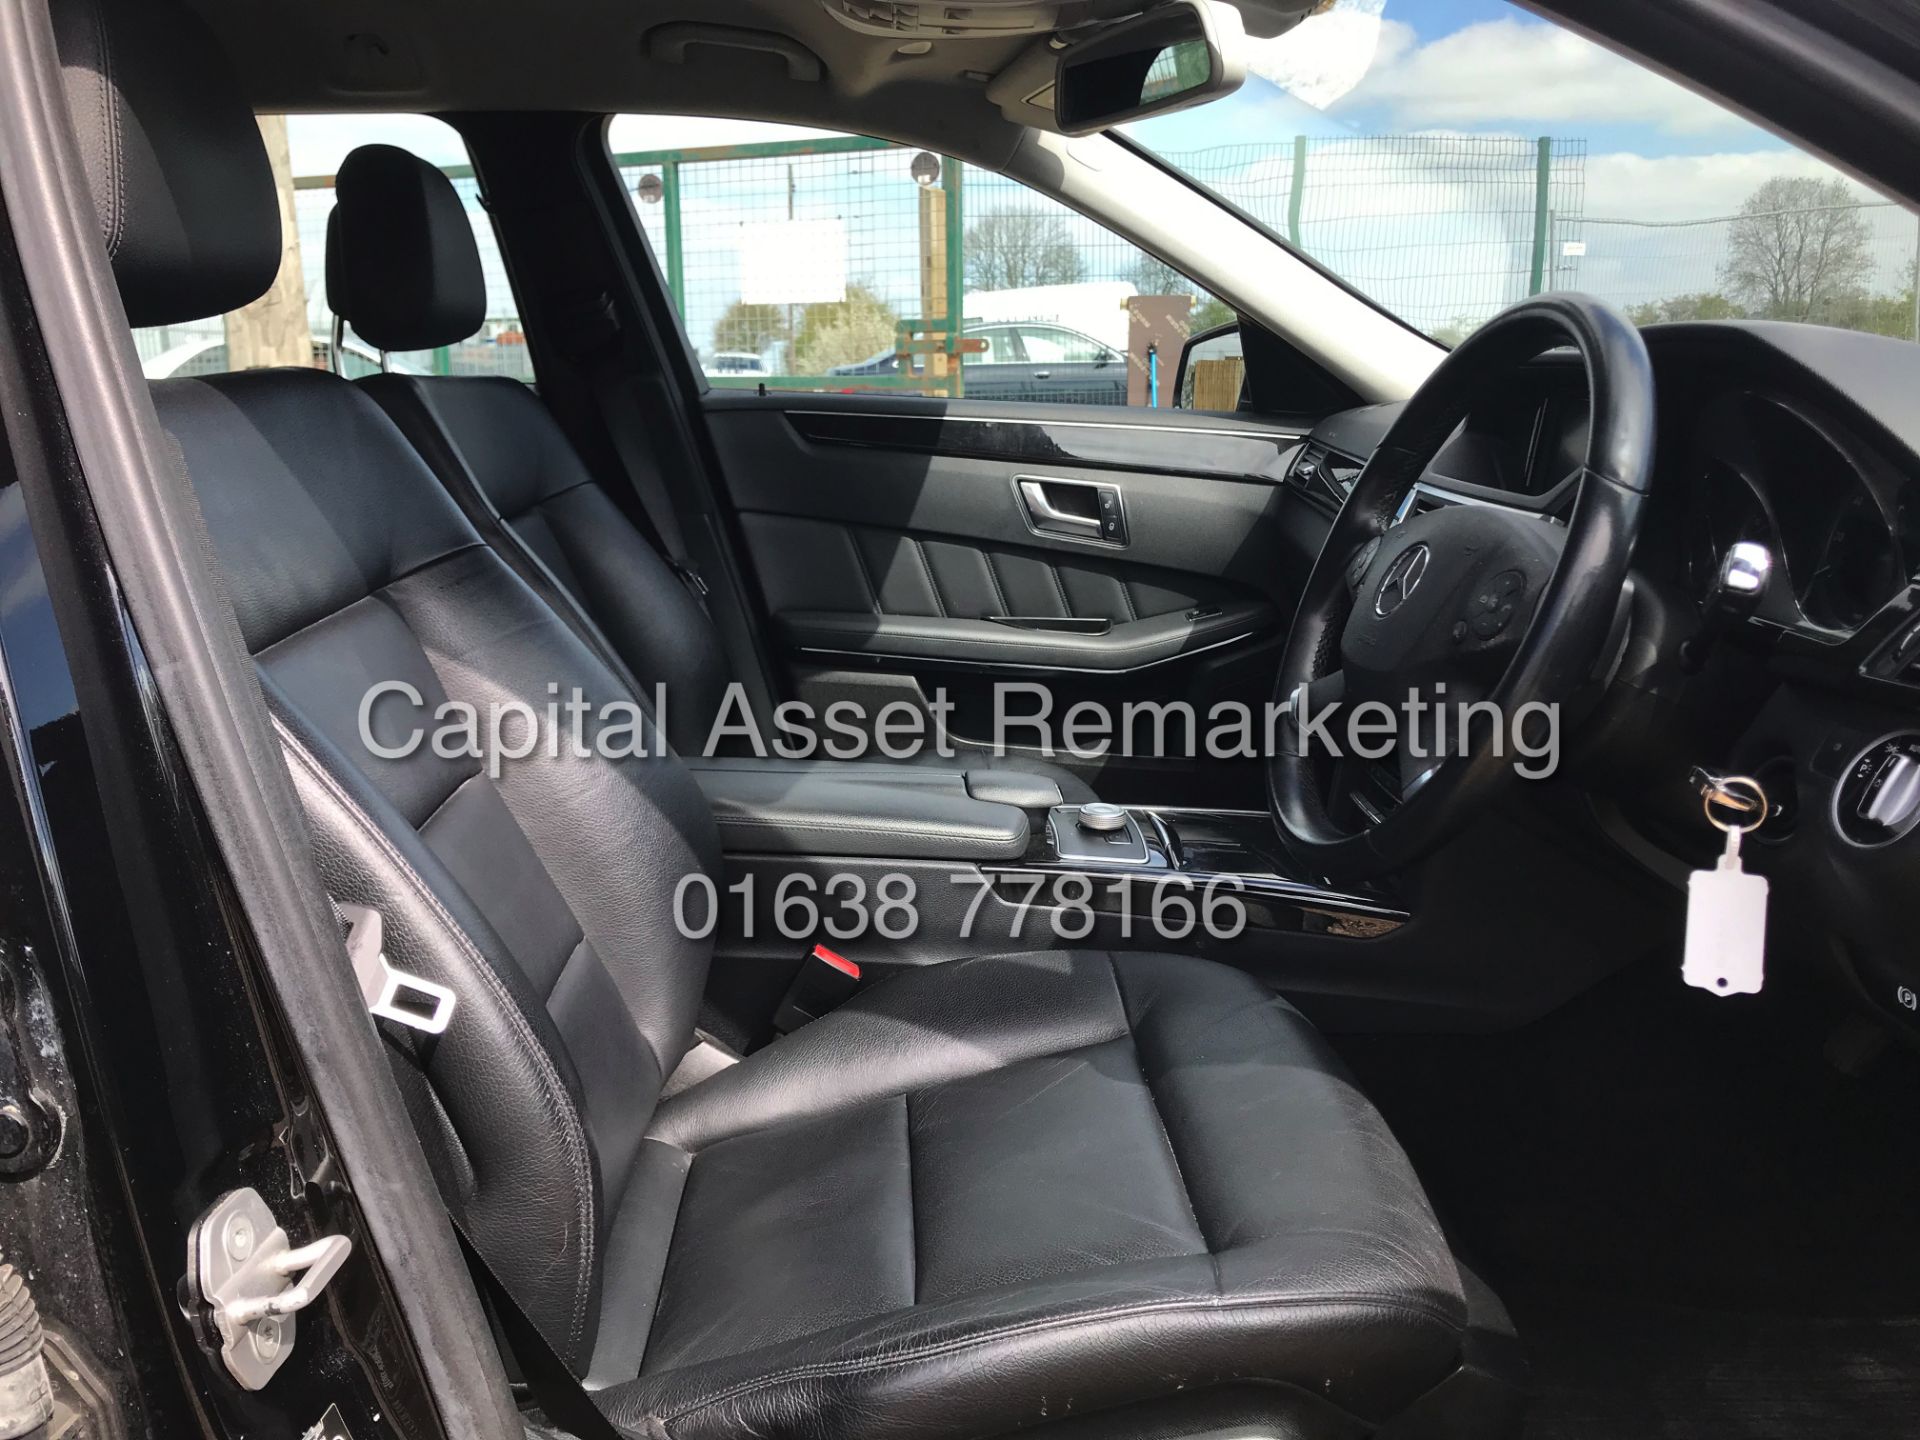 MERCEDES E220d 7G AUTO "EXECUTIVE - SPECIAL EQUIPMENT" SAT NAV - LEATHER - CLIMATE - CRUISE - Image 10 of 20